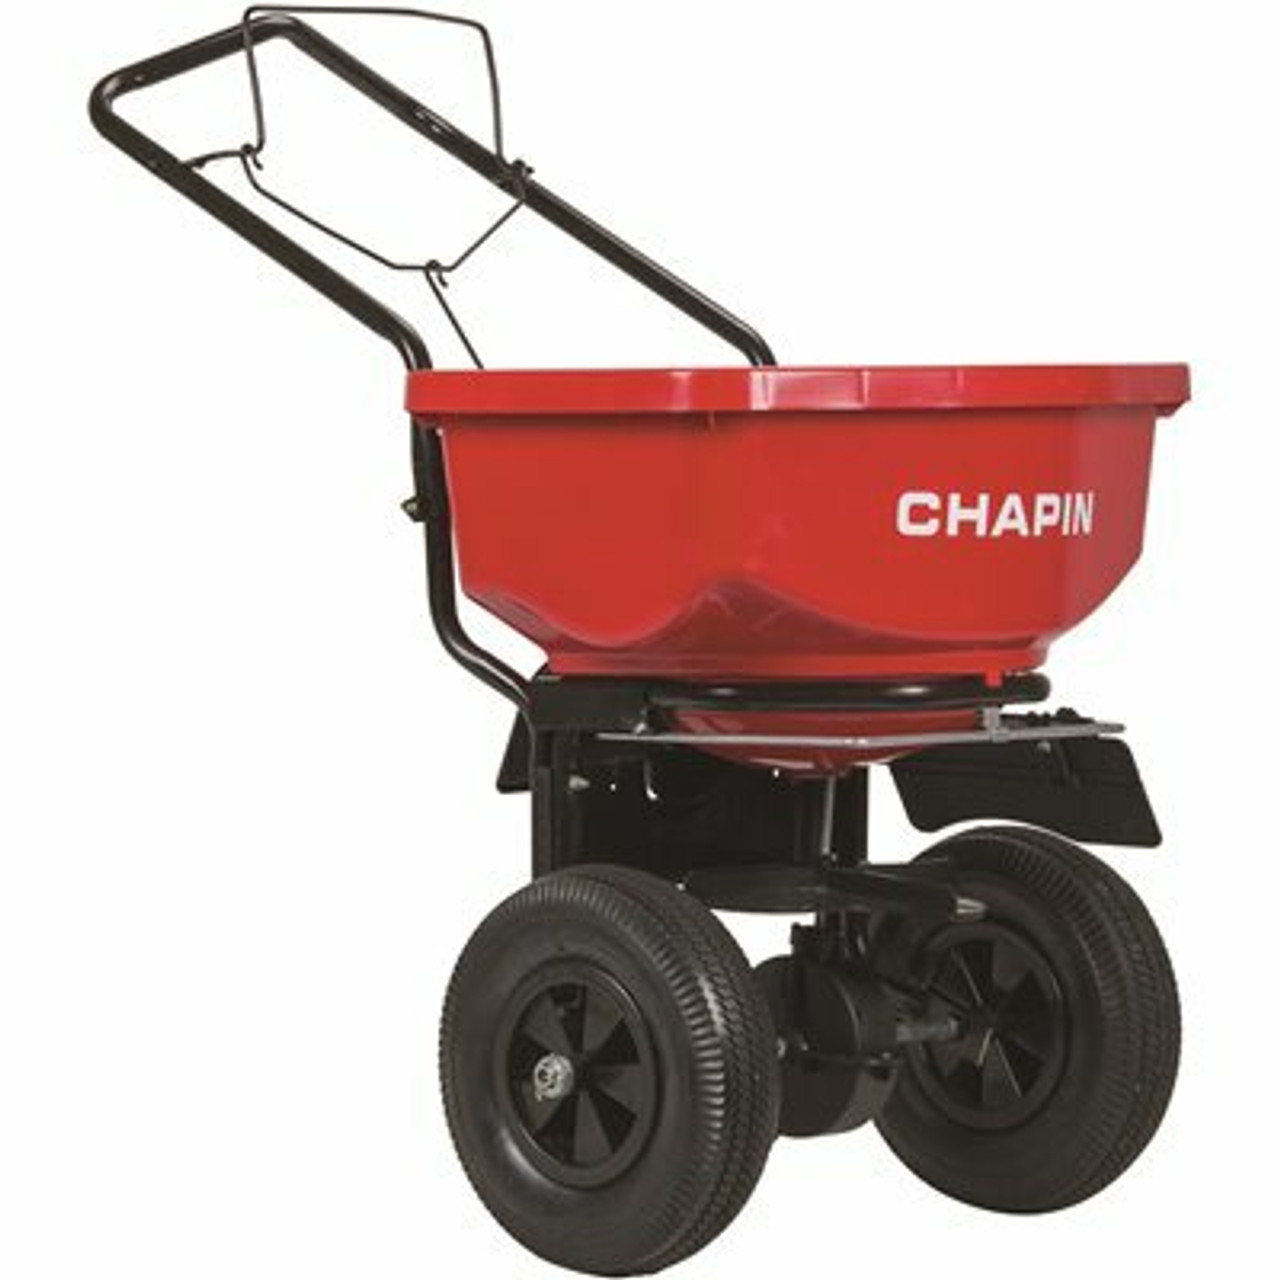 Chapin 80 Lbs. Capacity Residential Turf Spreader